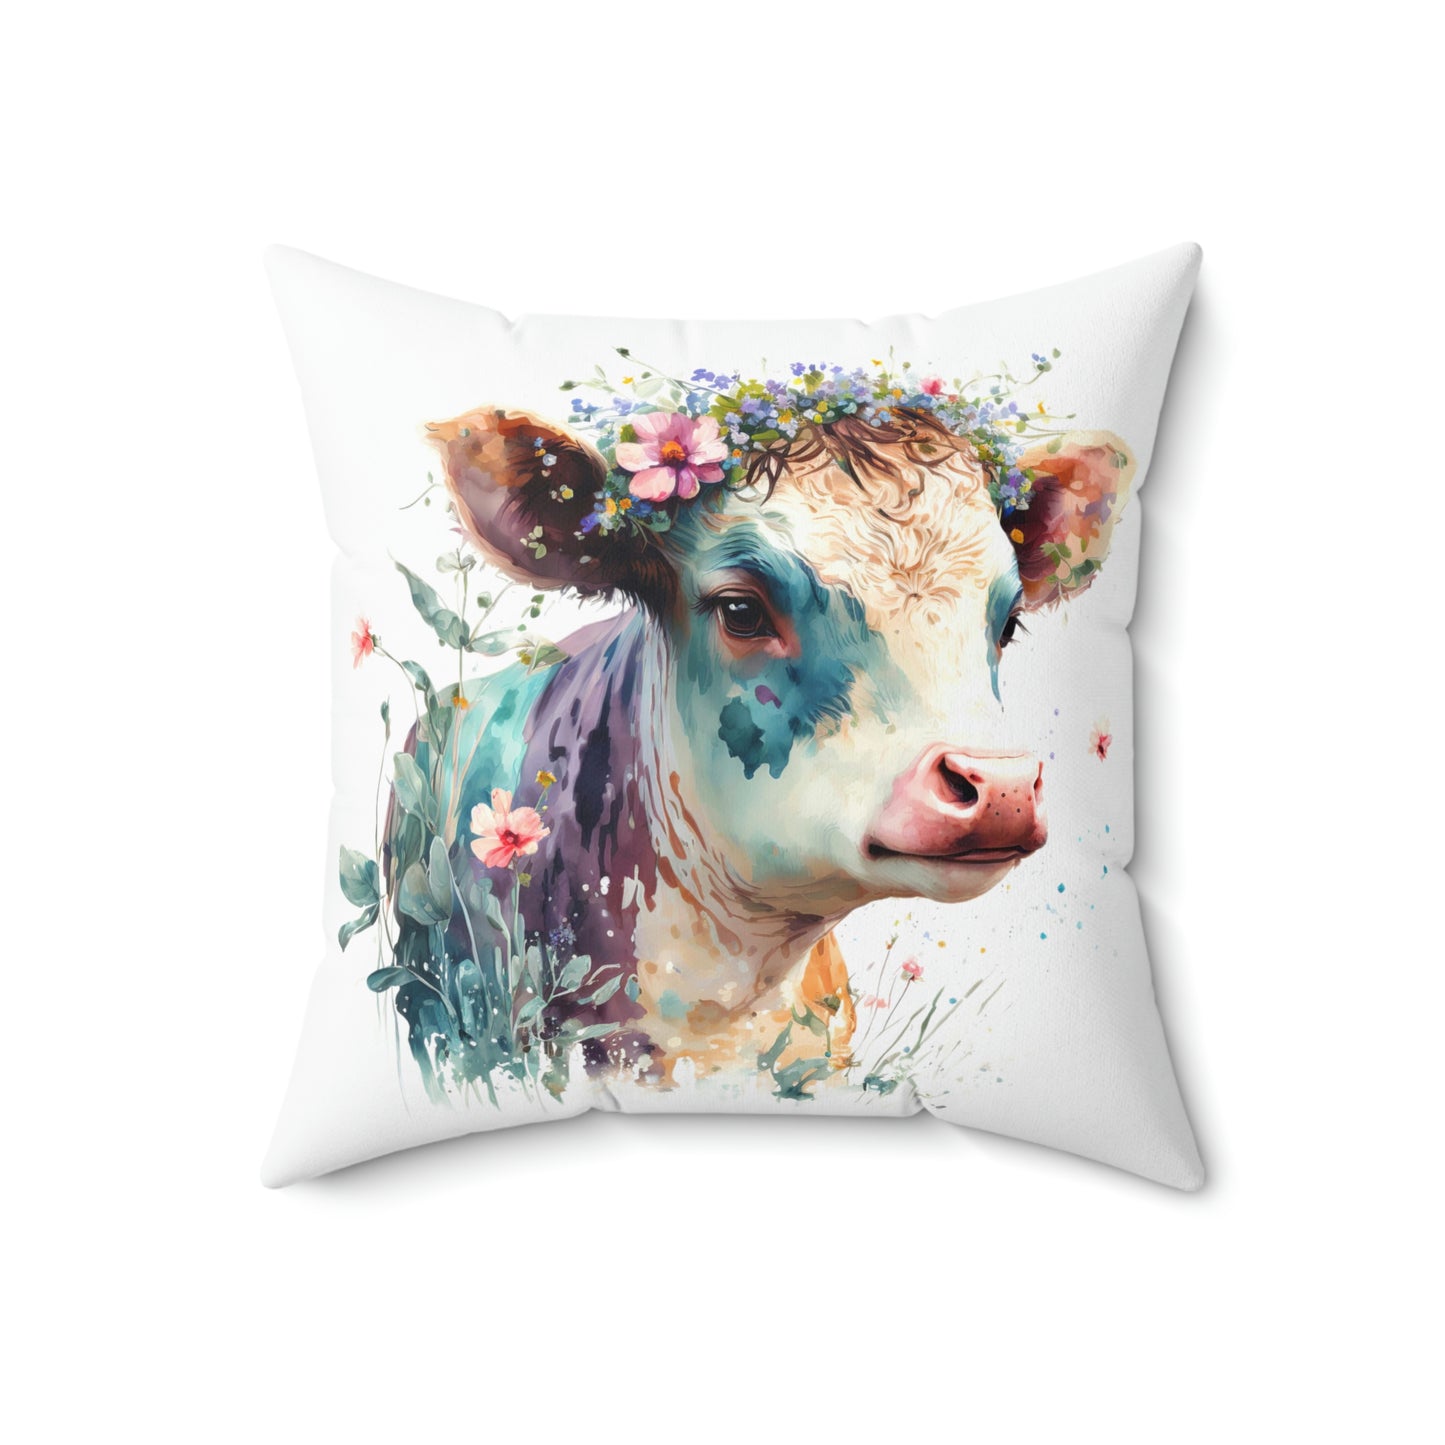 floral cow design accent pillow, cow accent throw pillow for your home decor, decorate your living room couch with a cow pattern throw pillow 